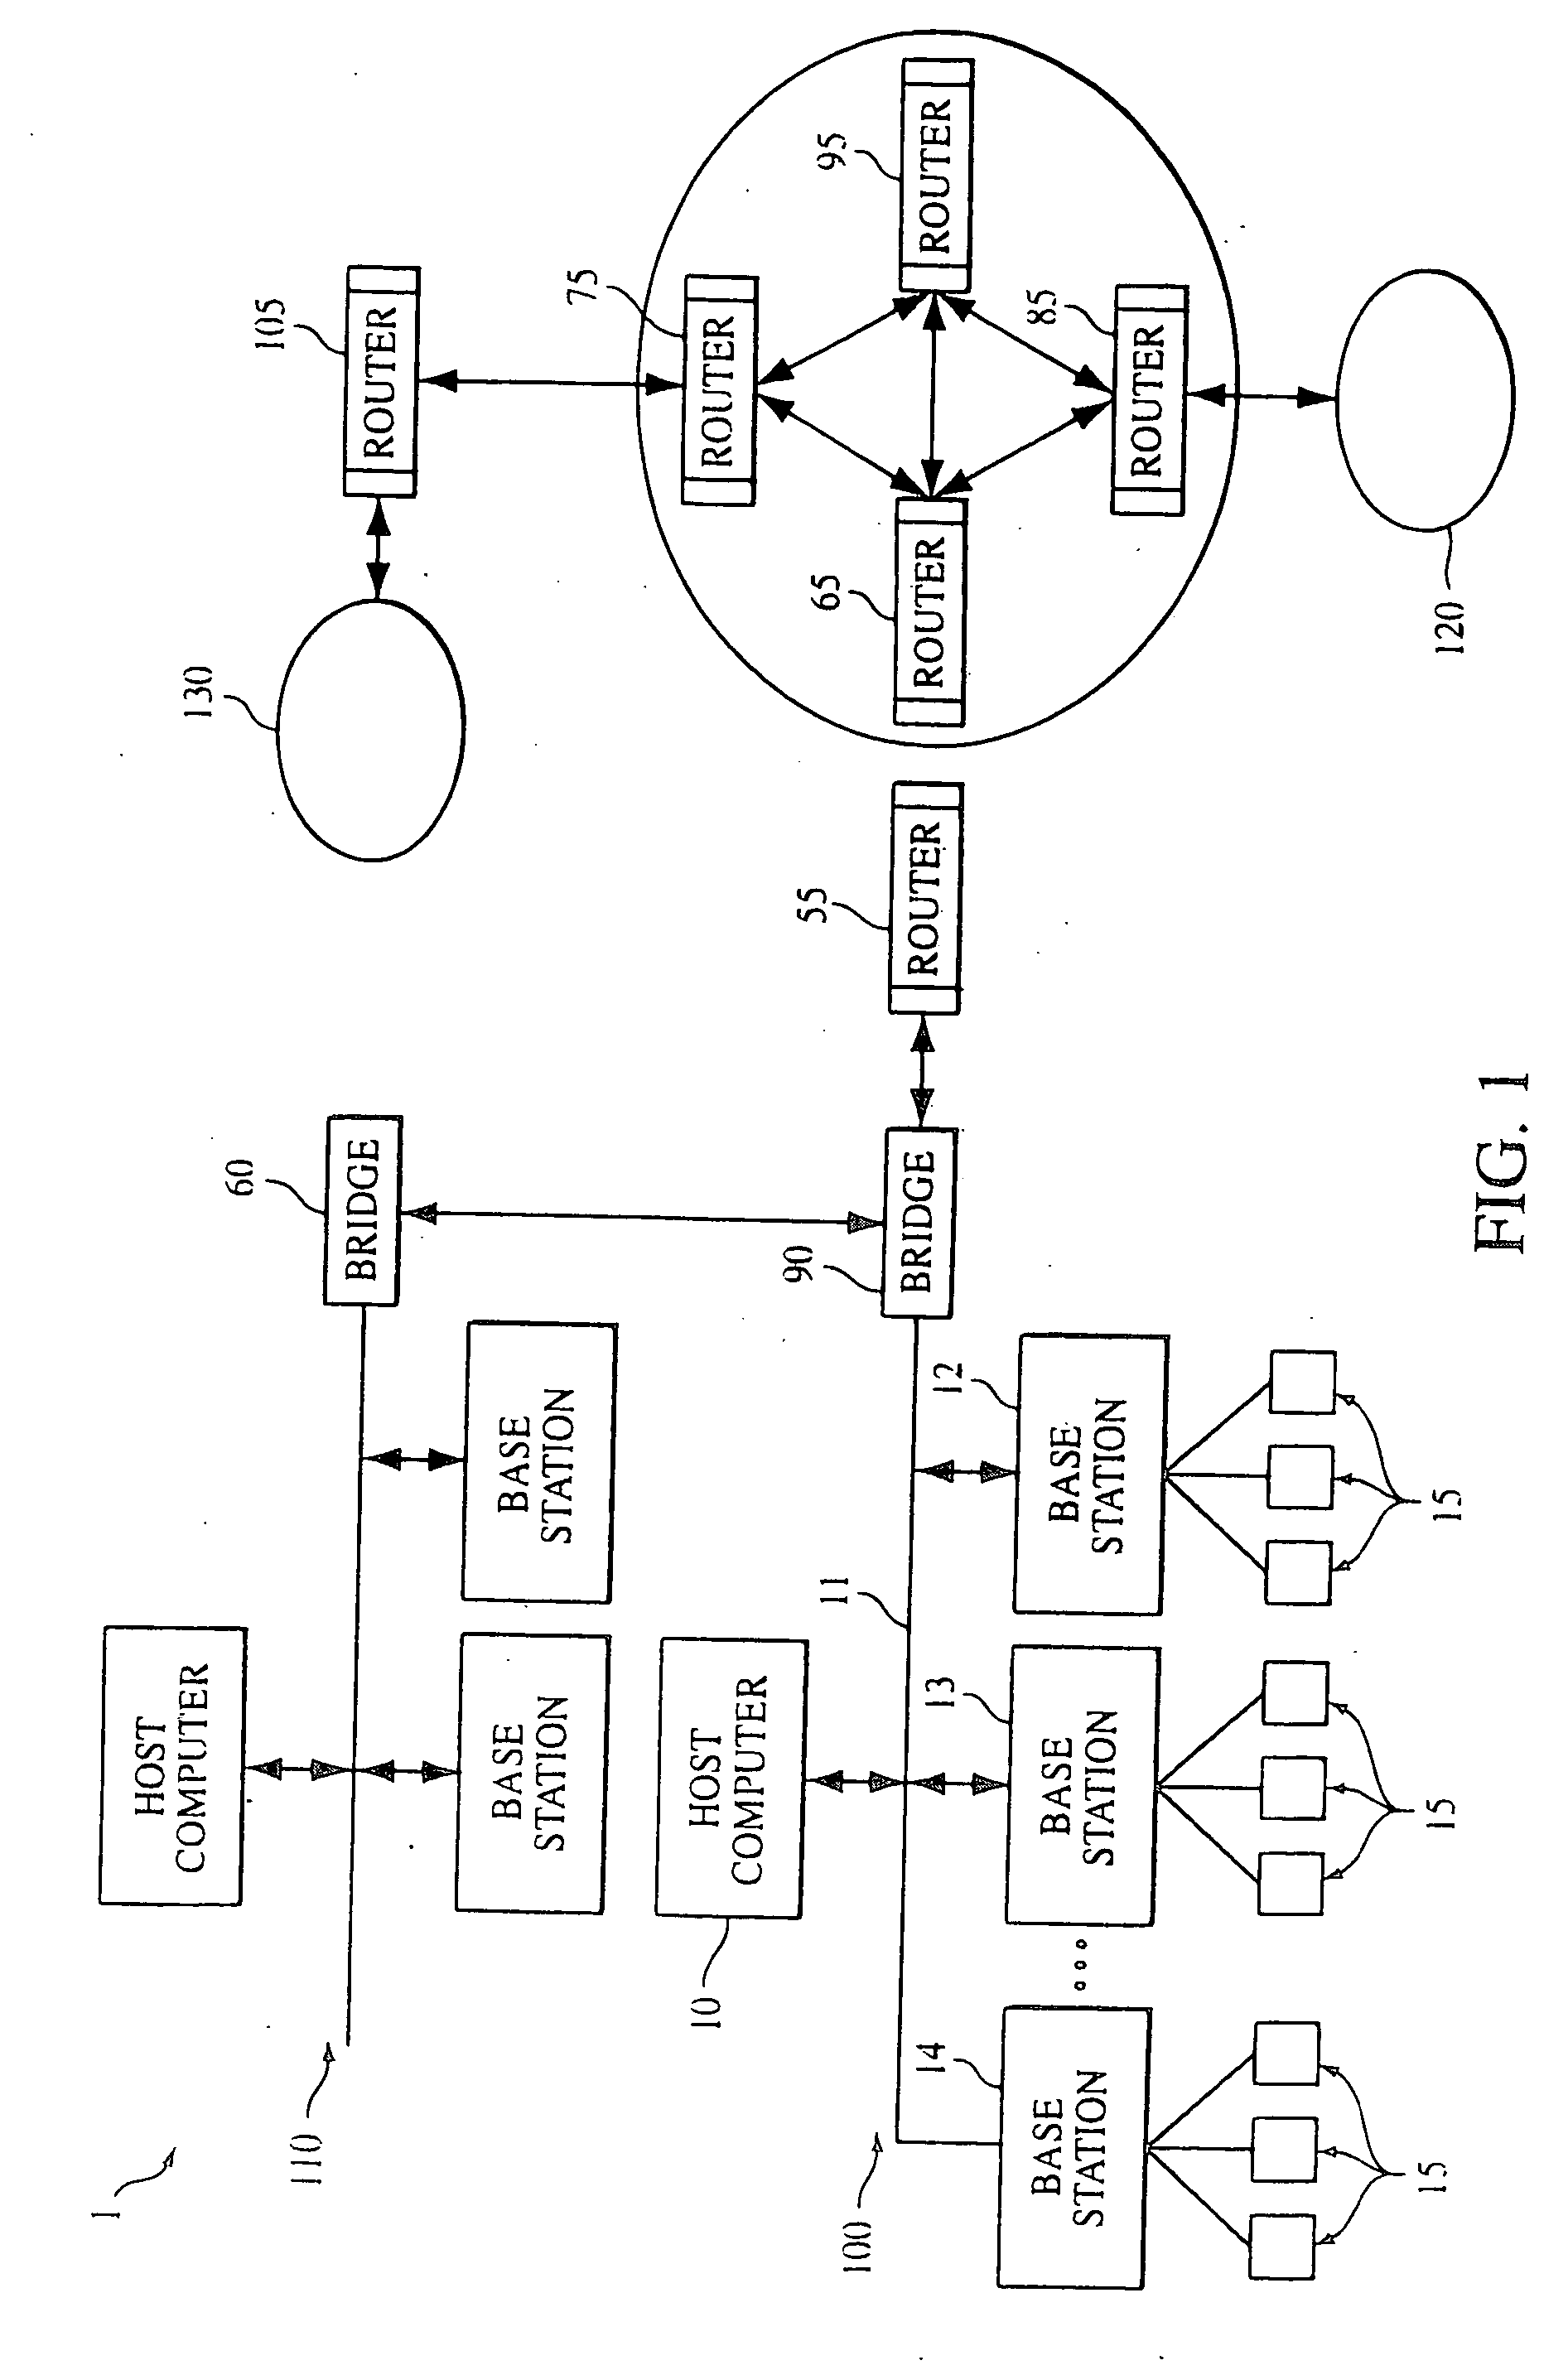 Auto configuration of portable computers for use in wireless local area networks